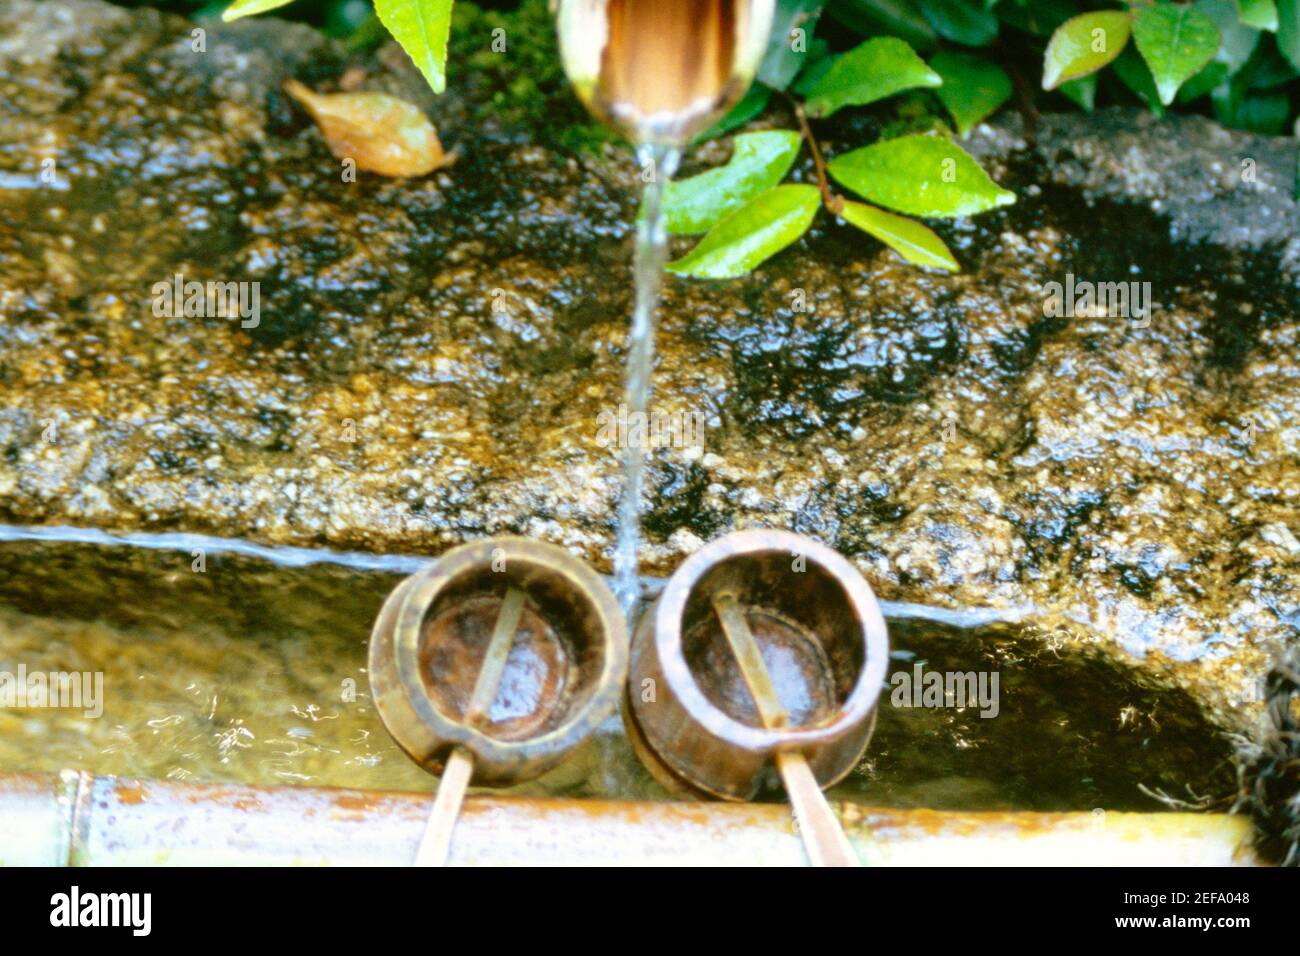 High angle view of water flowing from a pipe into the buckets, Ryoanji Temple, Kyoto, Japan Stock Photo